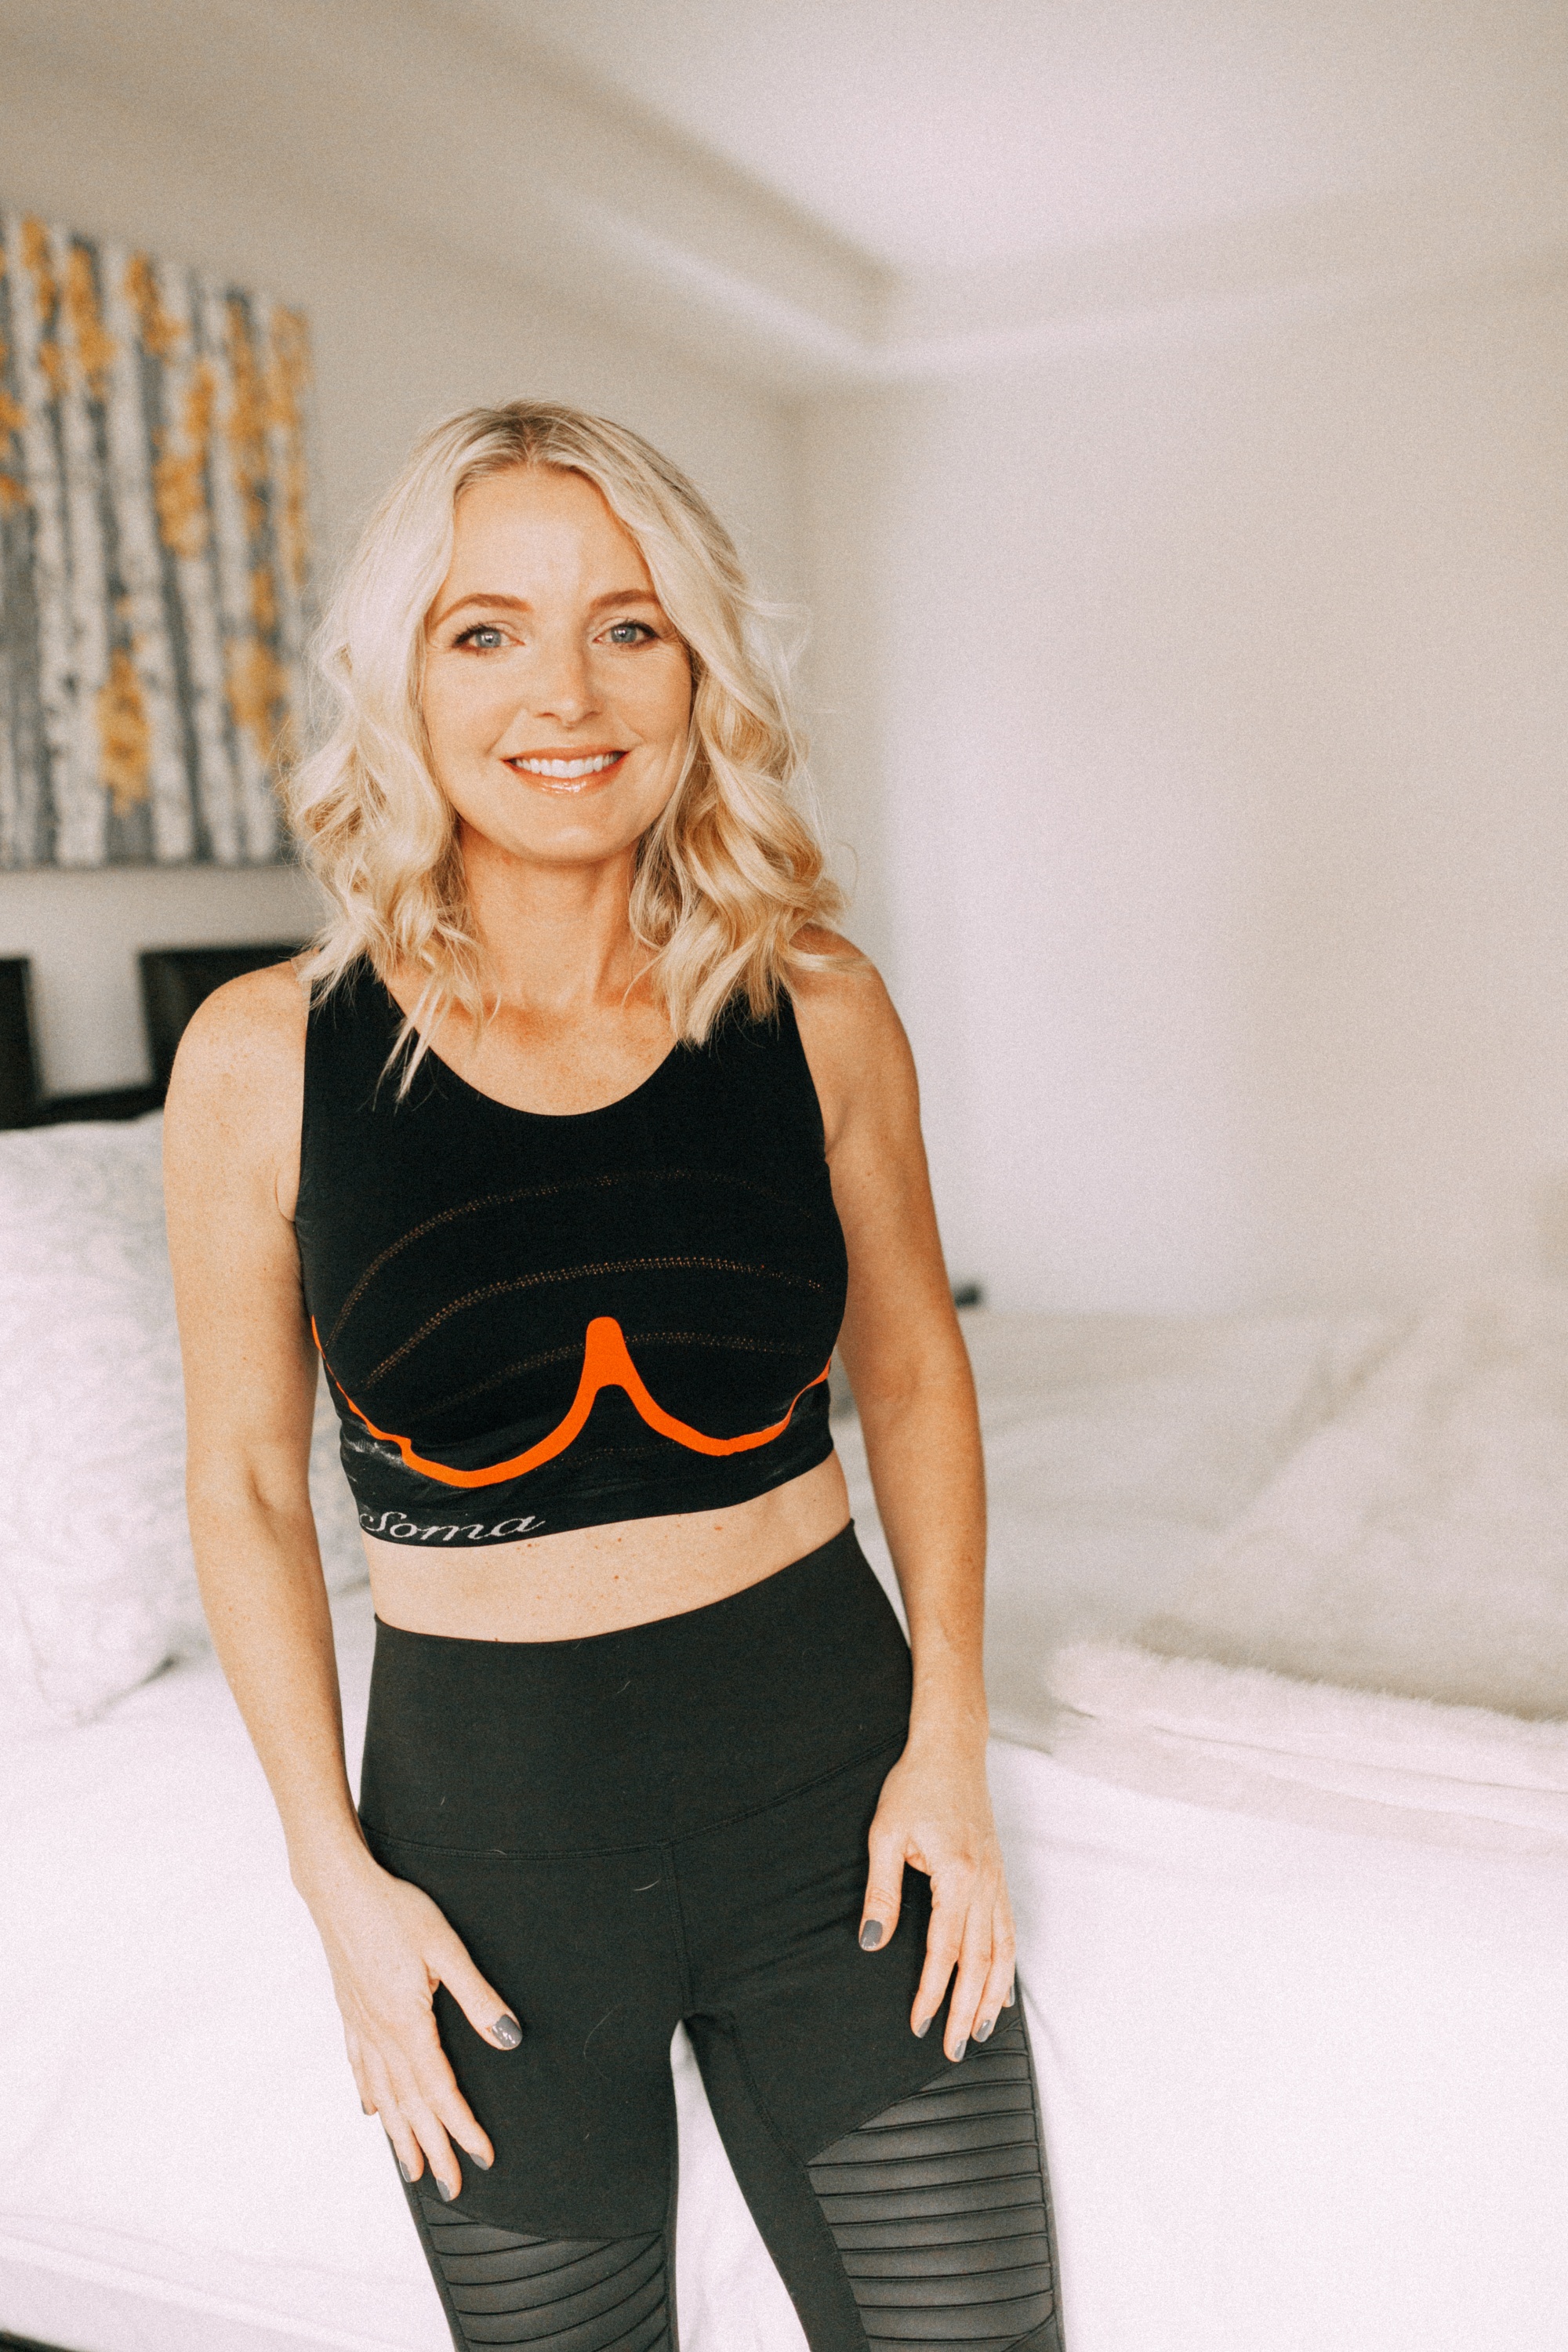 Fashion blogger Erin Busbee of BusbeeStyle.com wearing the new Soma Innofit bra sharing how to find your bra size with Soma's new technology